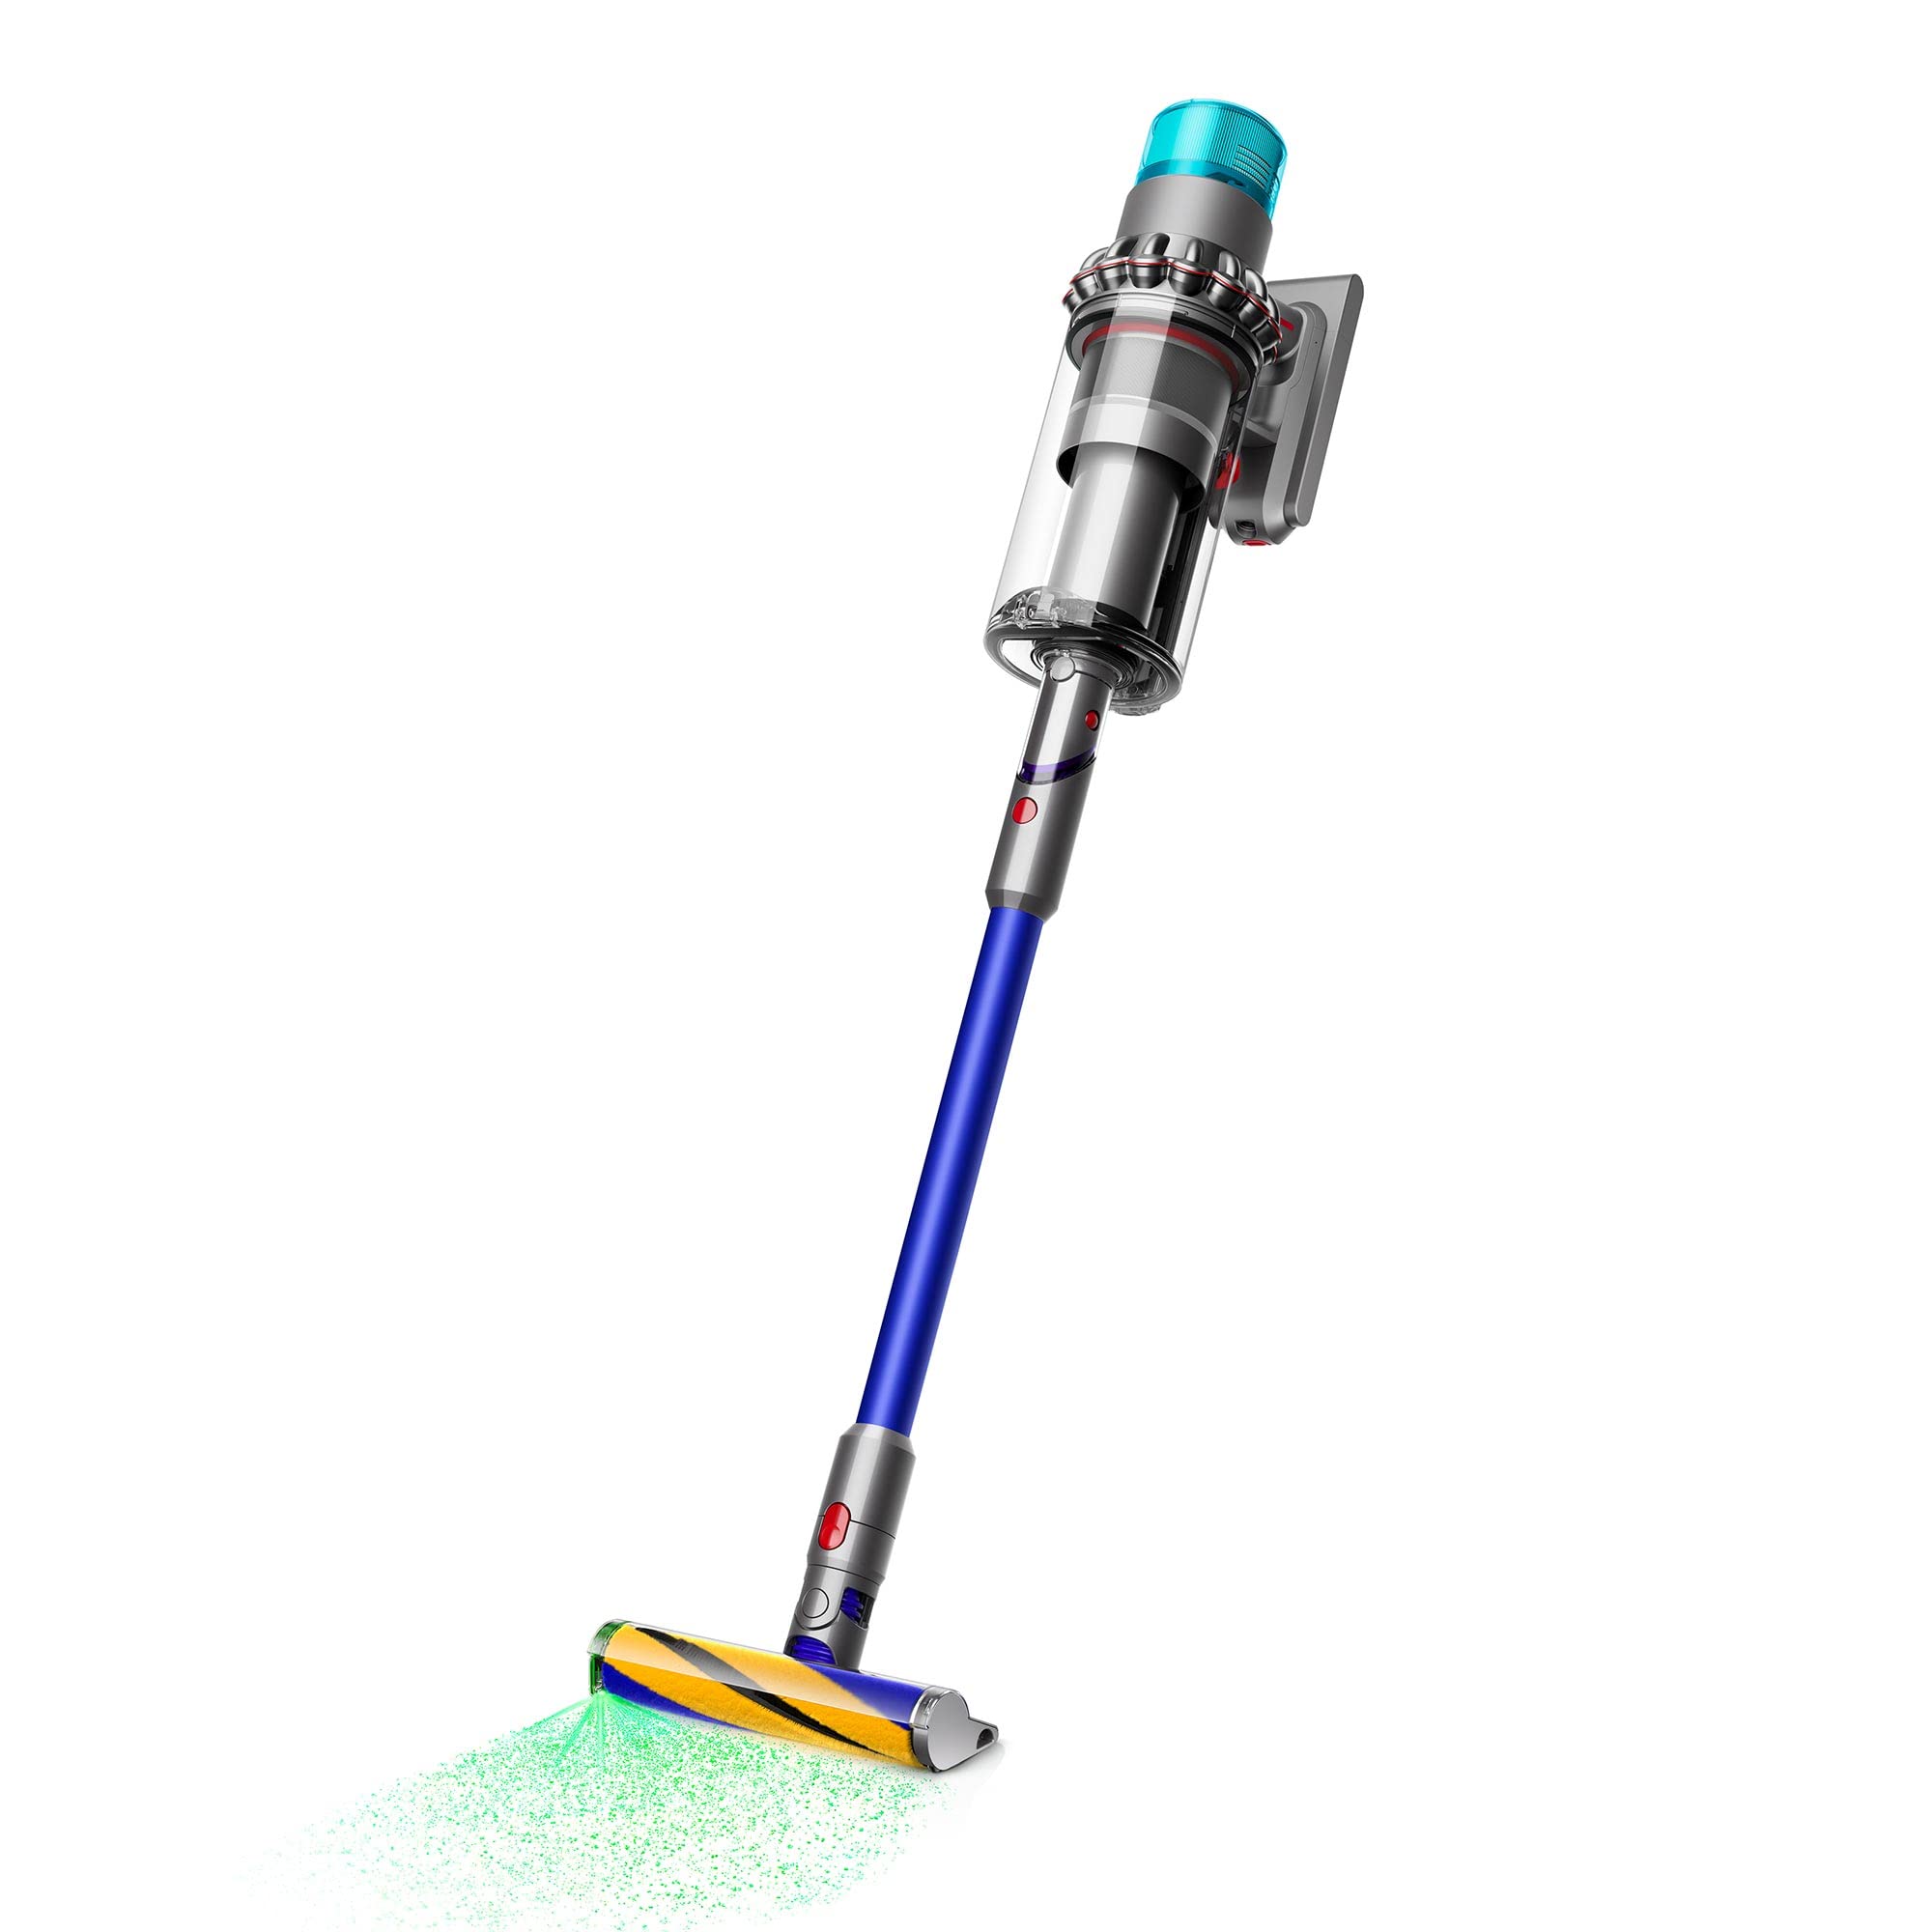 【Today's Special Price $59.99】Gen5outsize Cordless Vacuum Cleaner,factory direct sale special price!